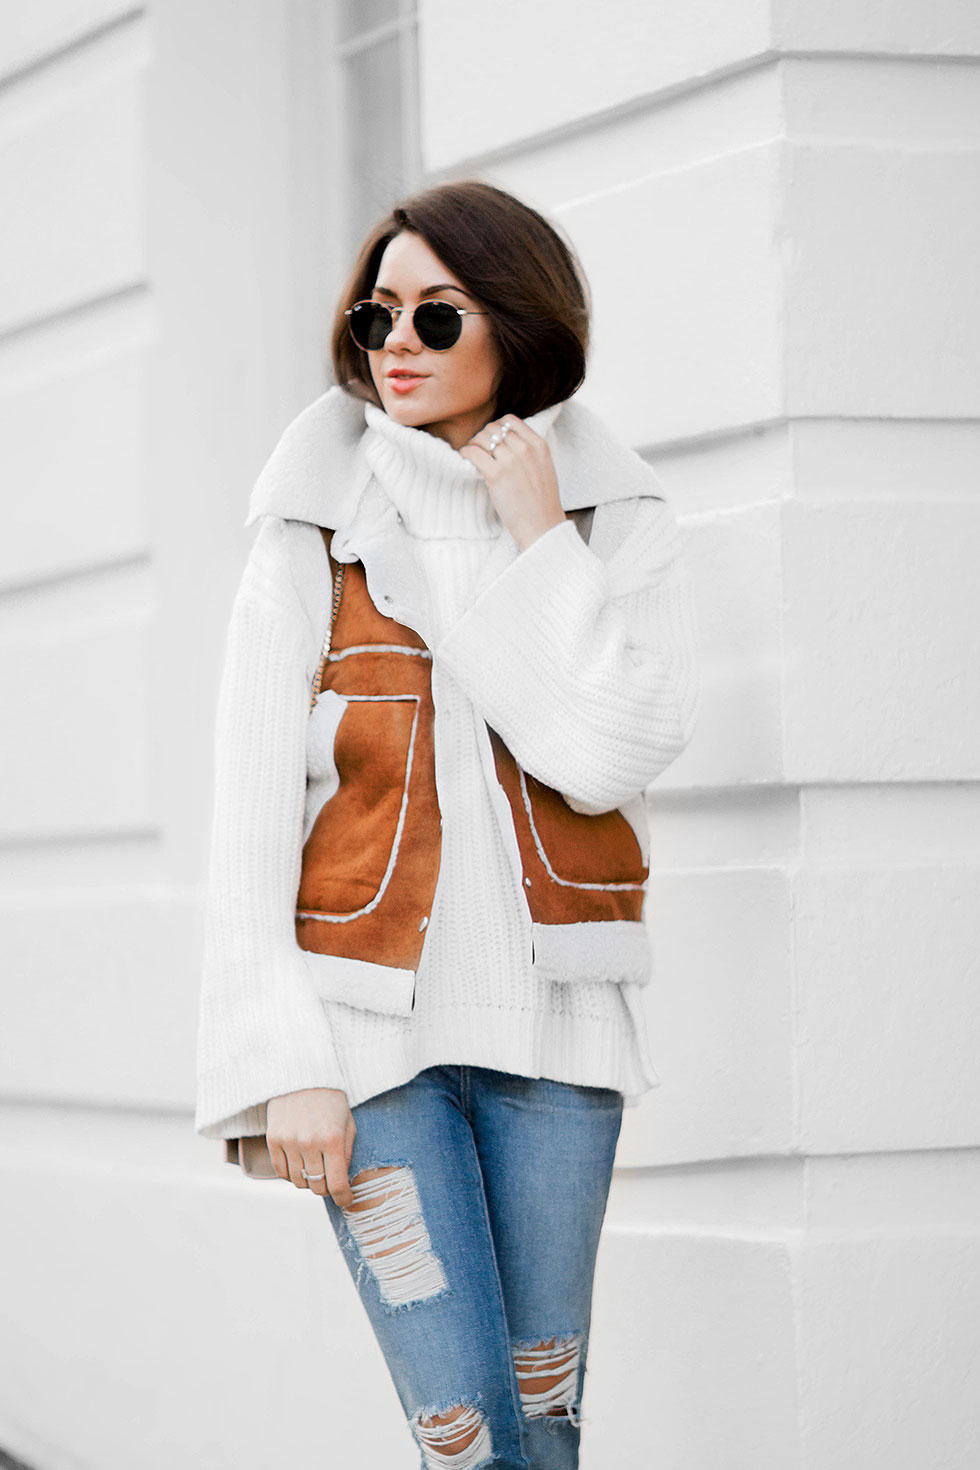 Easy winter outfit: sweater and jeans — Sarah Christine